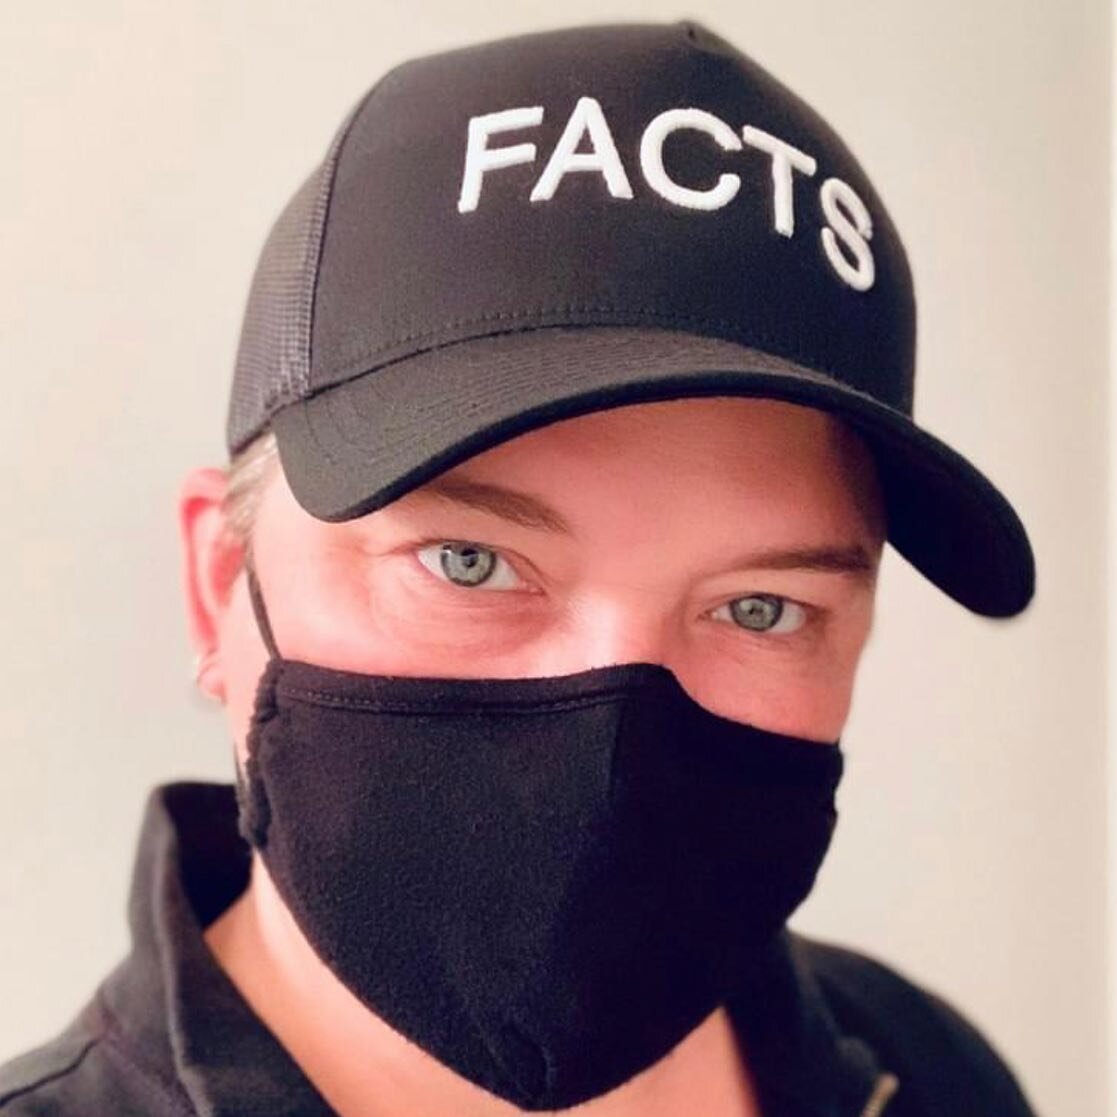 Look at this baller. The Black Facts Hat looks KILLER! Also look at those EYES!